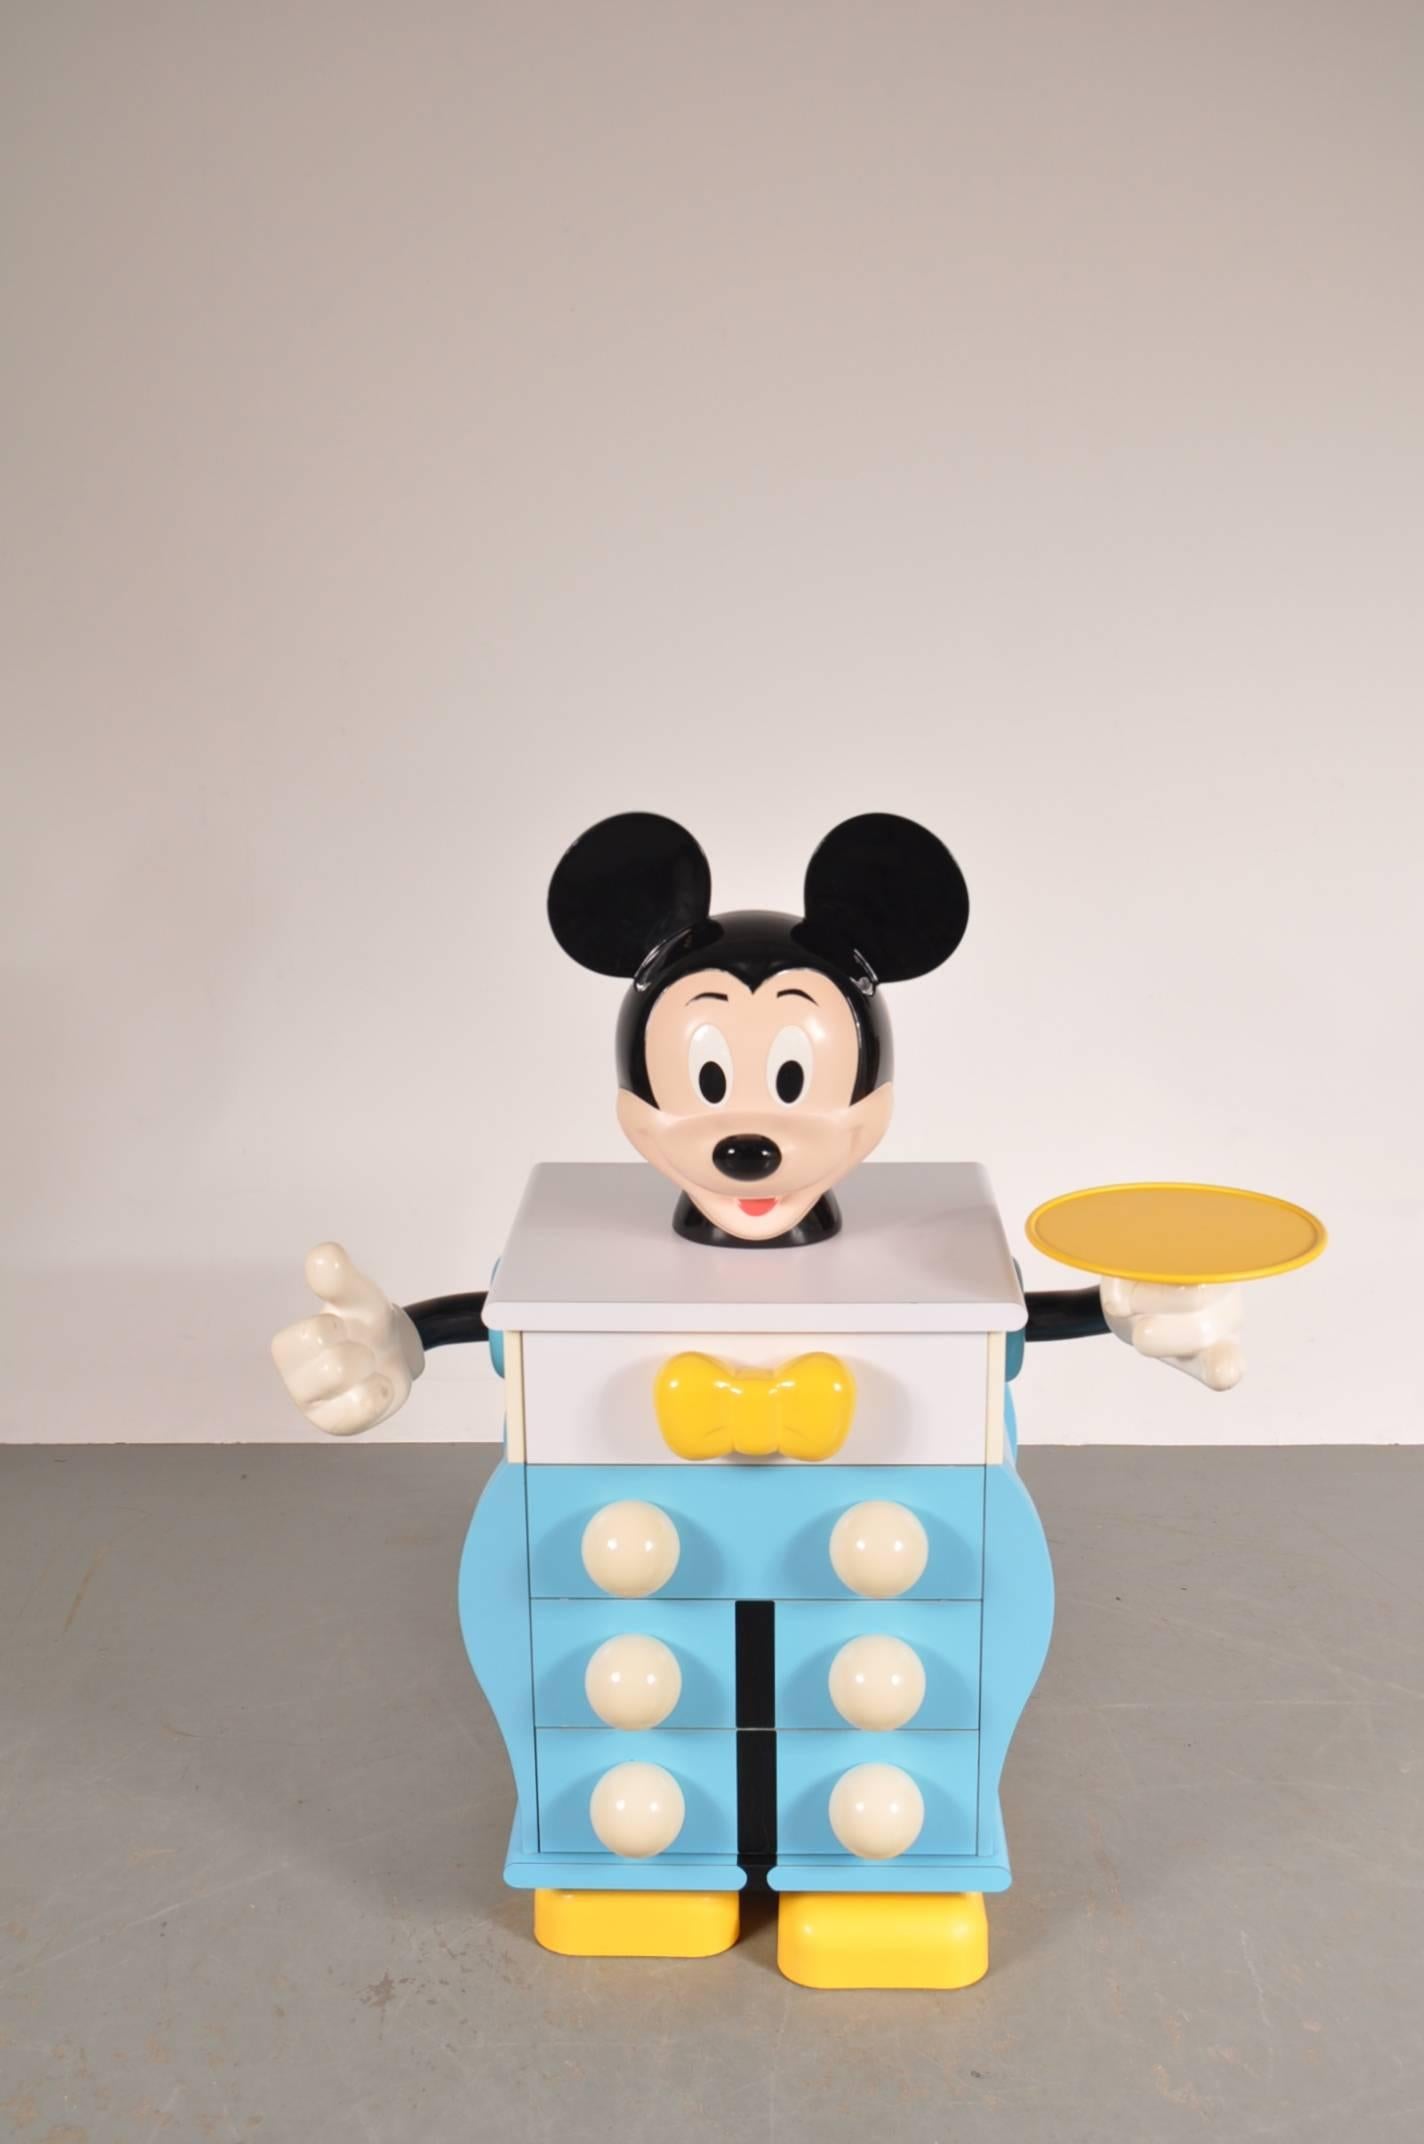 Very rare Mickey Mouse shaped cabinet, designed by Pierre Colleu, manufactured by Starform in France, circa 1980.

This creative cabinet would be the perfect eye-catcher for any children's room, or other interior looking for something special! The